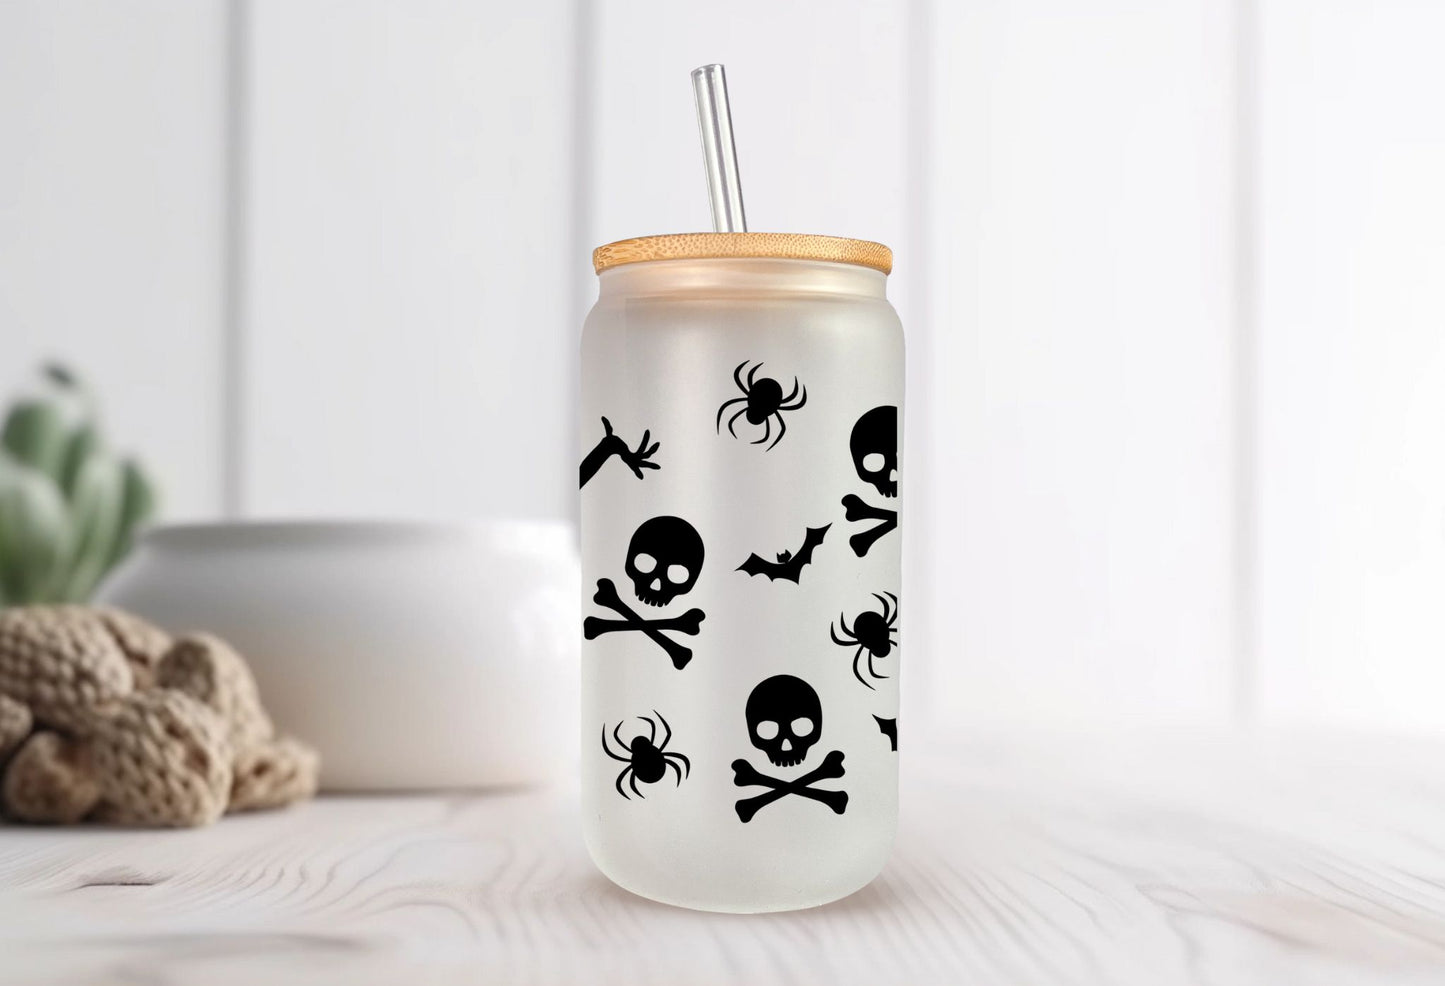 Enjoy your favorite beverage in our Dancing Skeletons Frosted 16 oz Libbey Style Glass with bamboo lid and straw